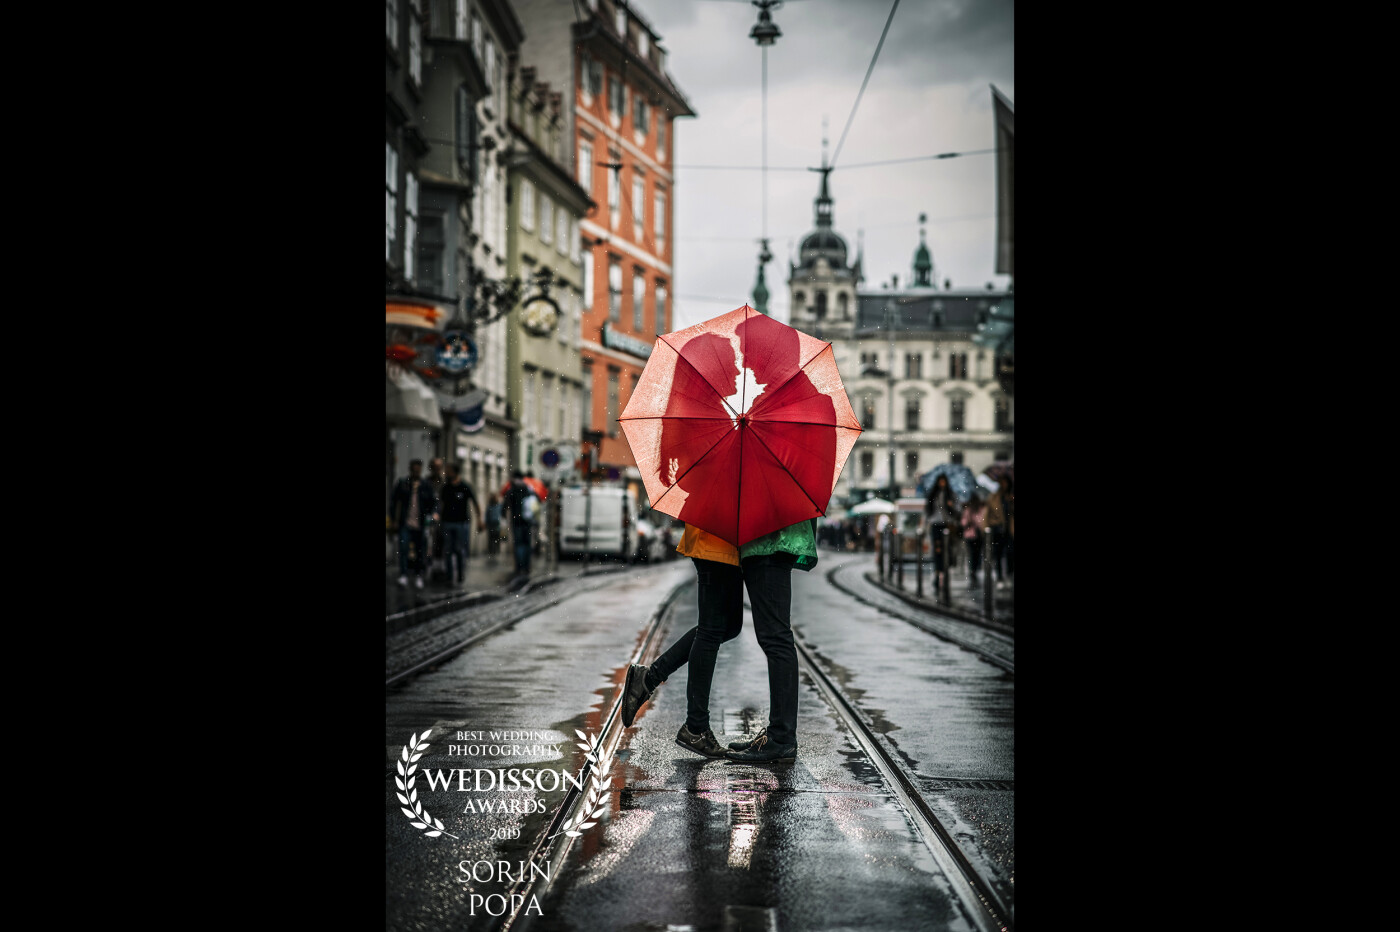 Shooting in bad weather seems to create amazing shoots! I shoot this picture on the streets of Graz, Austria! The couple was very playful, and they just stop to have a little hug, covering themselves with the umbrella. I chose to lit with a Speedlite flash to create some dramatic shadow. 